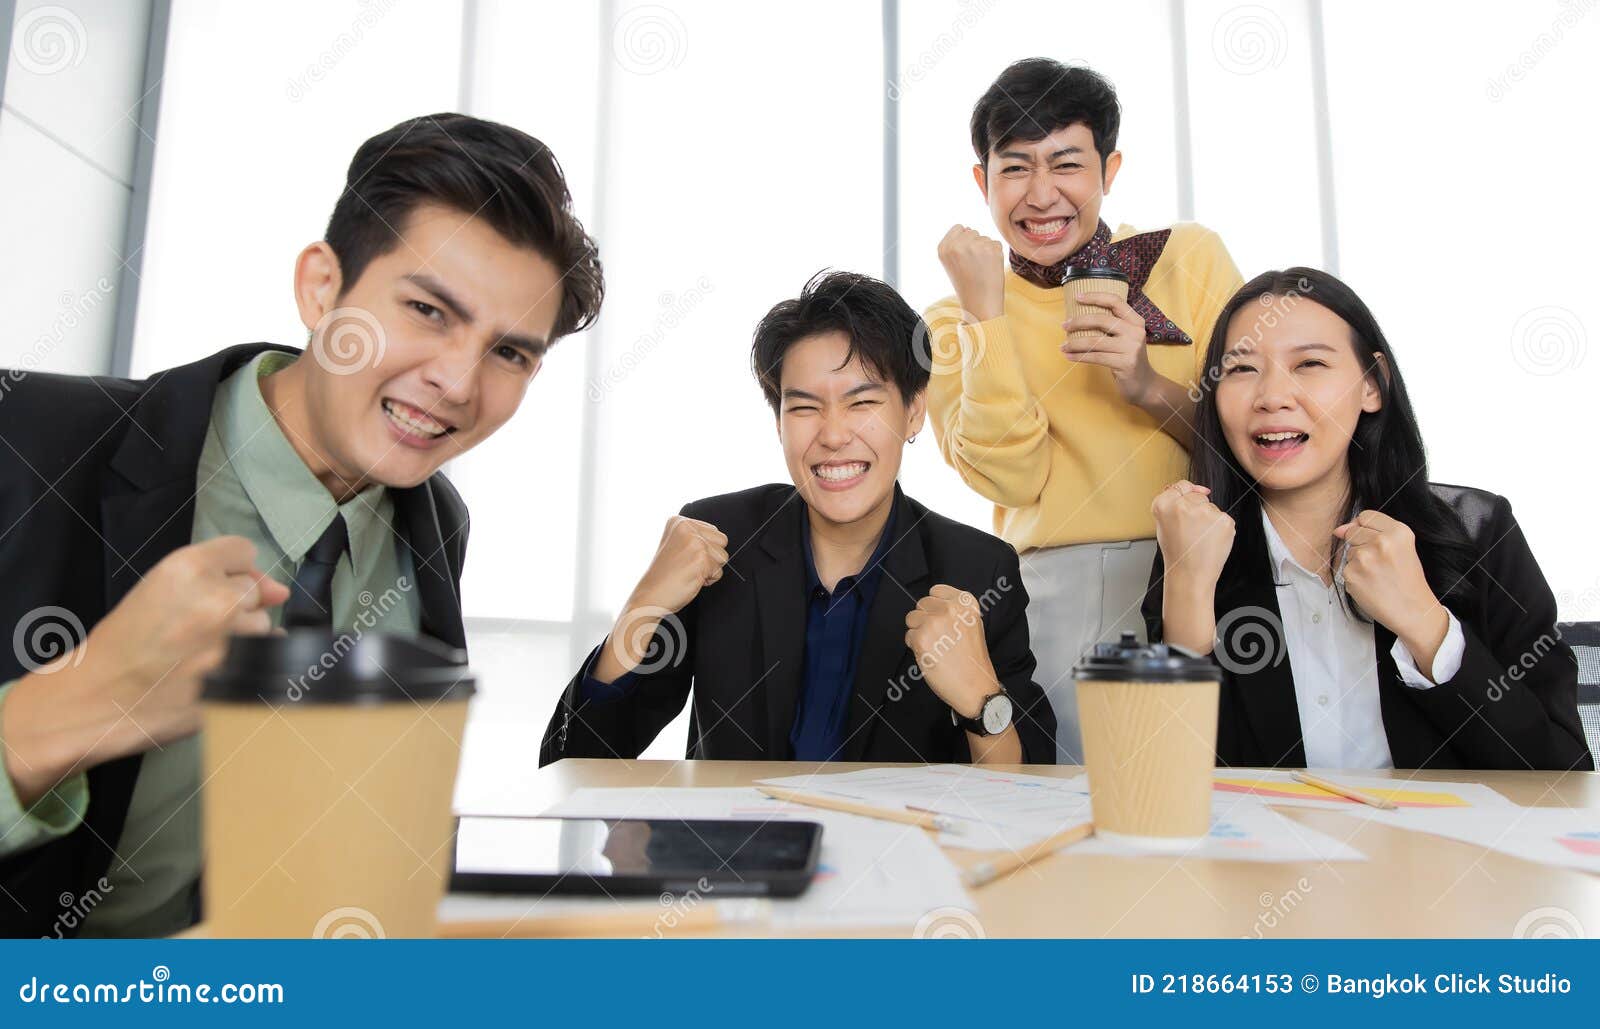 A Group of Multi-sex Colleagues Businesspeople Working Together in Teleconference Online Zoom Meeting, Looking To Webcam Camera Stock Image